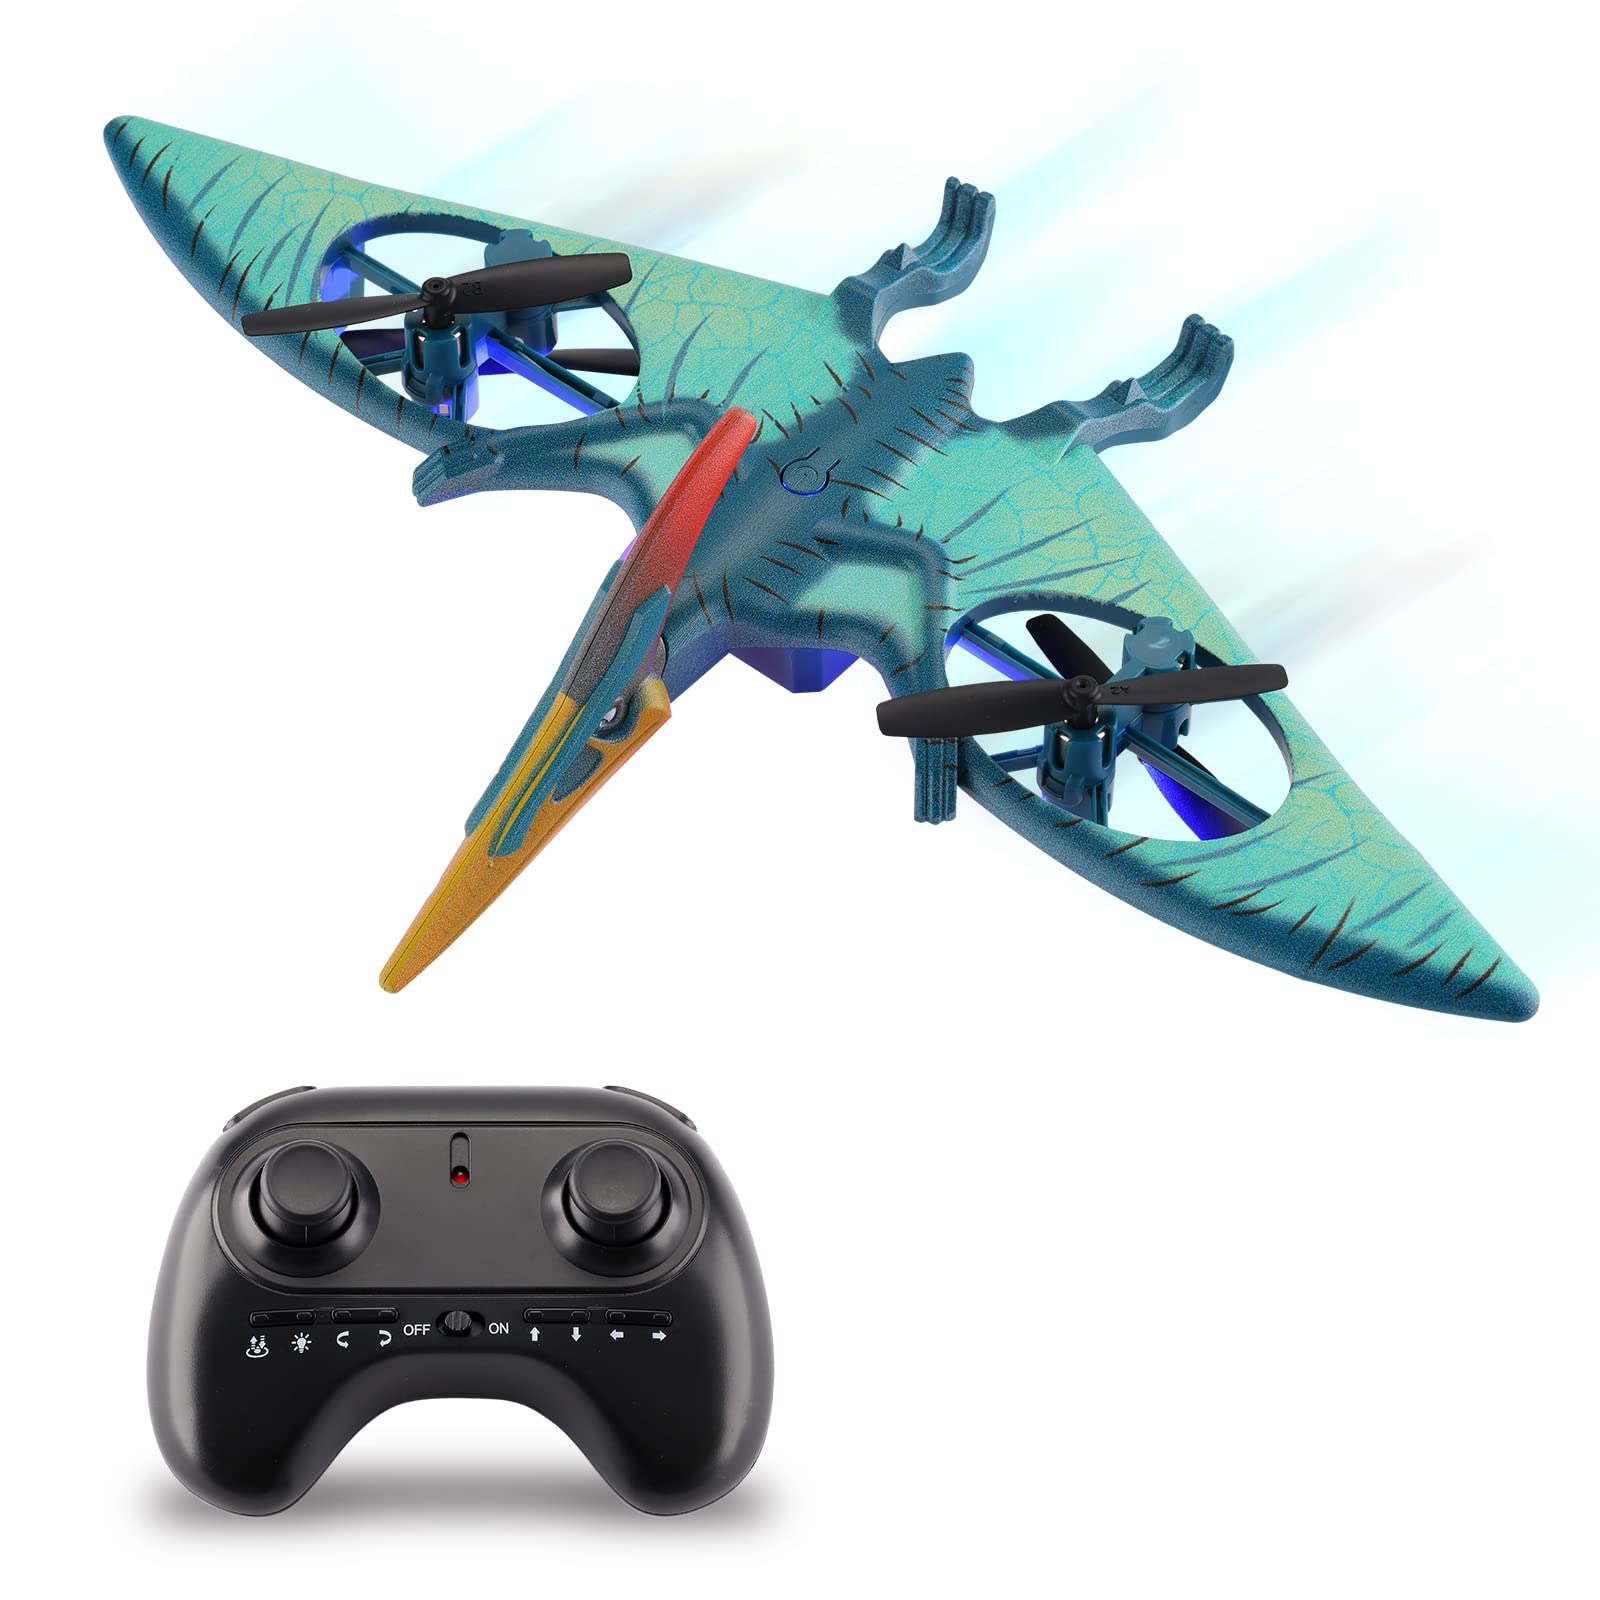 Pterosaur Dinosaur Toys Drone for Kids – Headless Mode, One Key Start Speed Adjustment,Indoor Quadcopter with Altitude Hold,Toys for 8 9 10 11 12 Year Old Boys&Girls, Birthday, Christmas Gifts